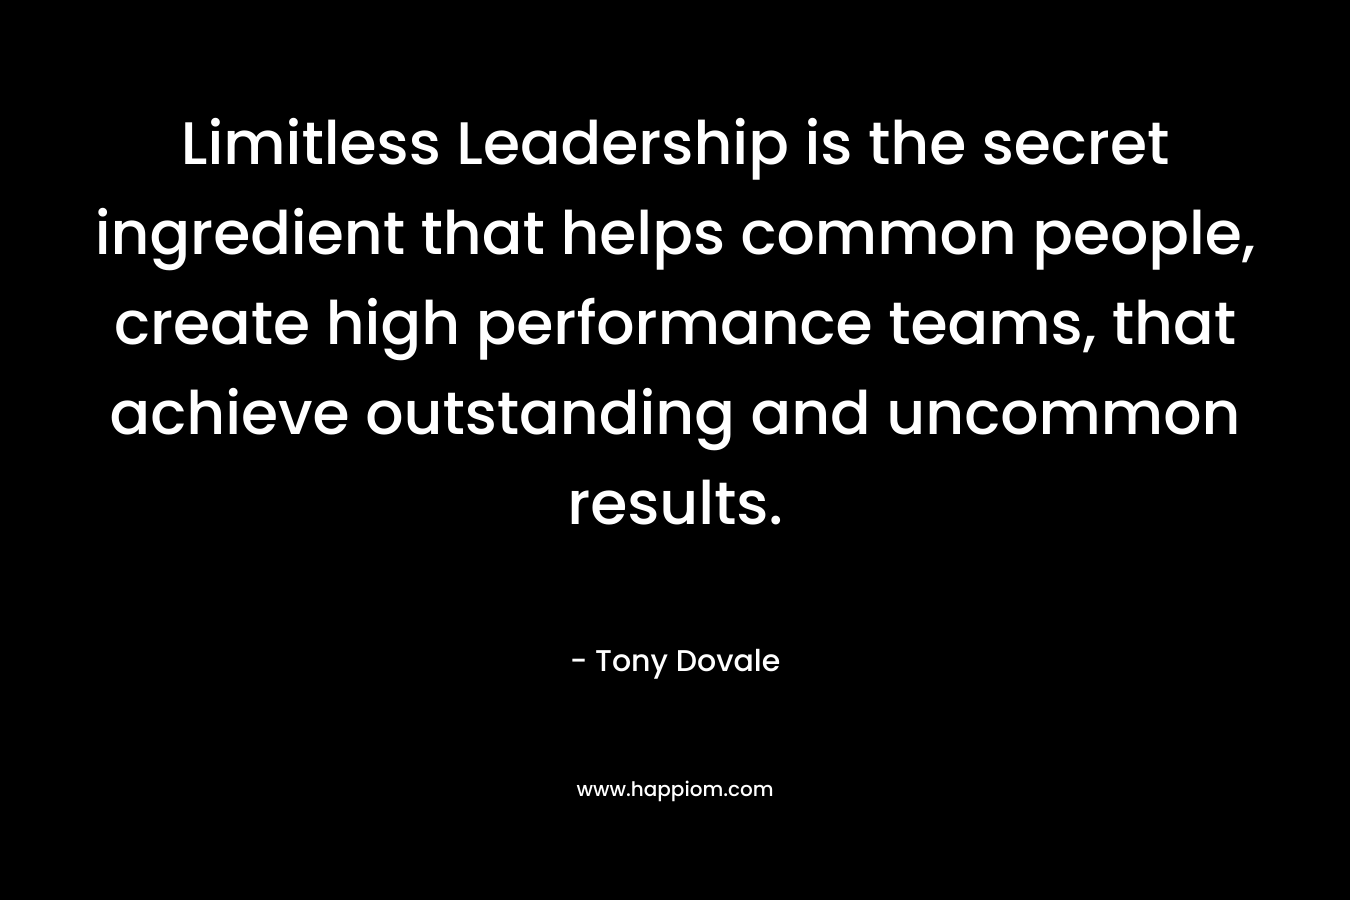 Limitless Leadership is the secret ingredient that helps common people, create high performance teams, that achieve outstanding and uncommon results. – Tony Dovale